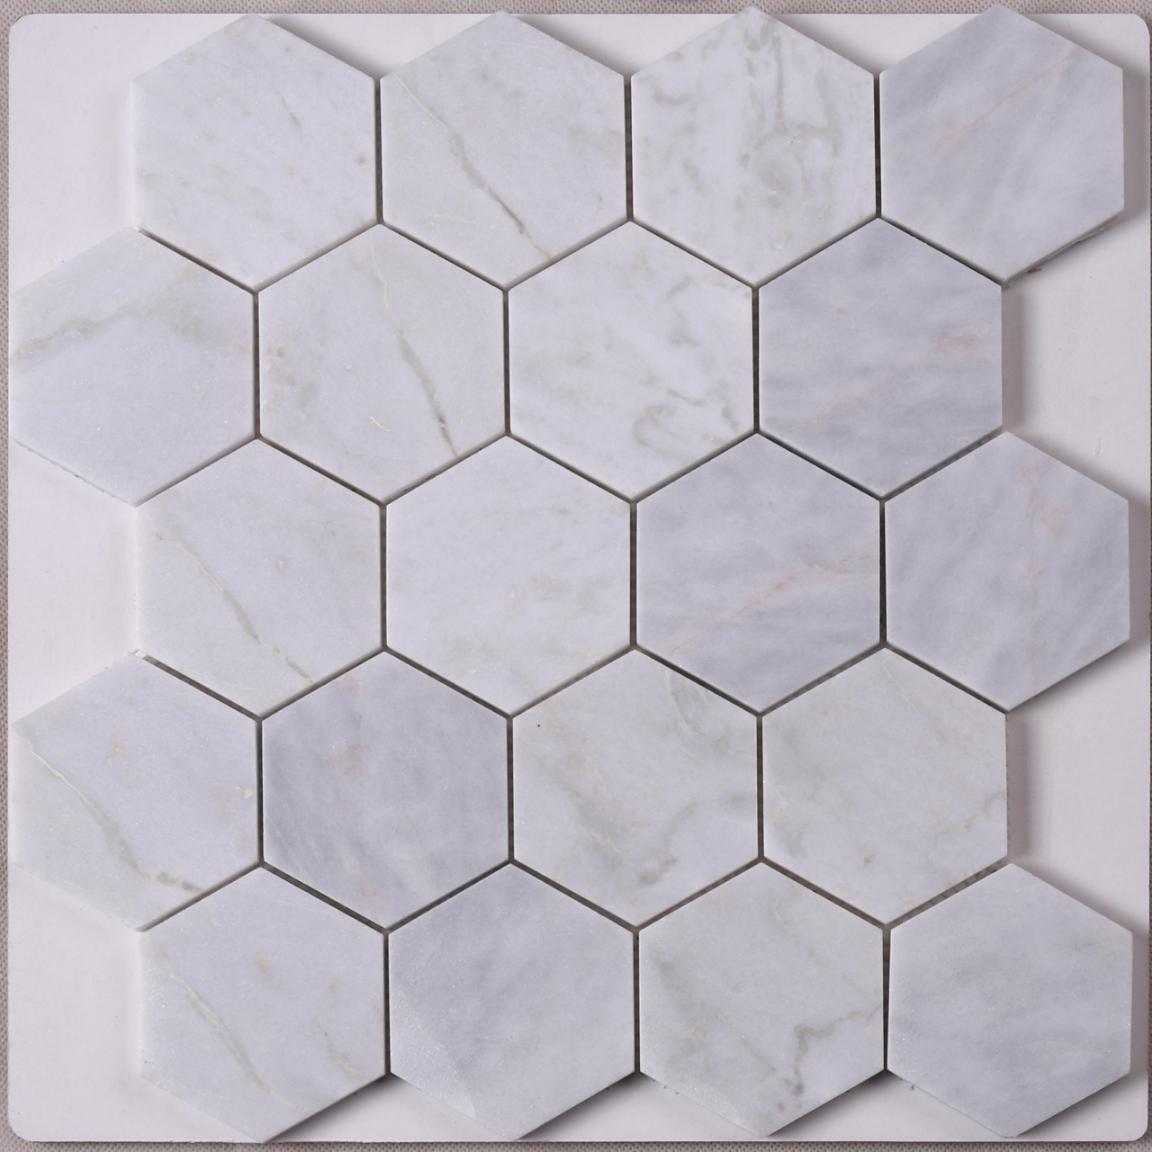 Heng Xing Best crystal glass mosaic tiles suppliers Suppliers for hotel-1